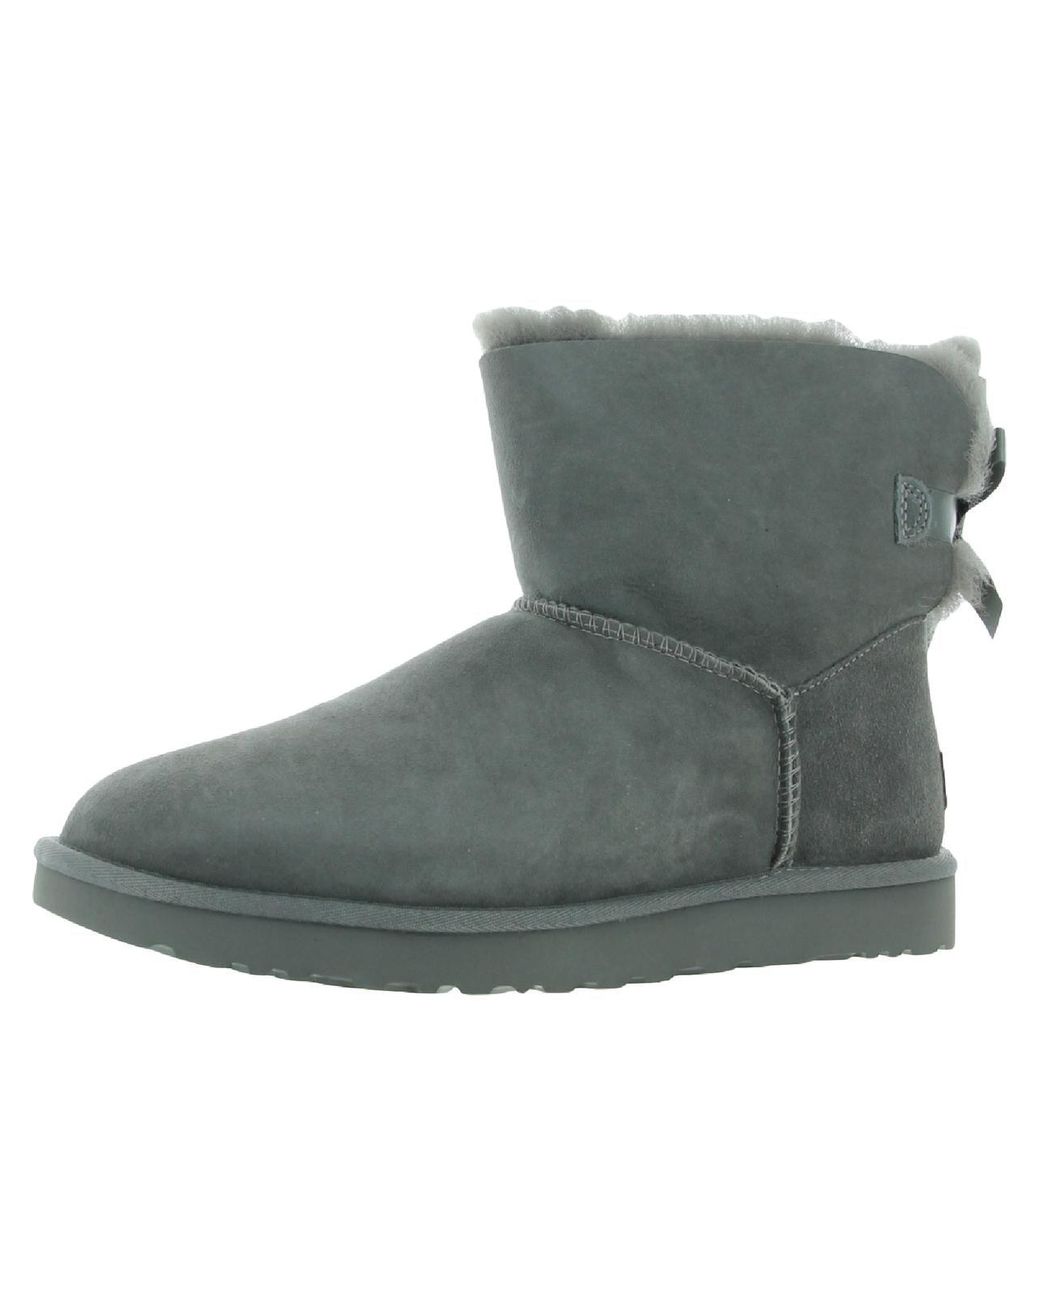 UGG Mini Bailey Bow Ii Suede Shearling Winter Boots in Gray | Lyst